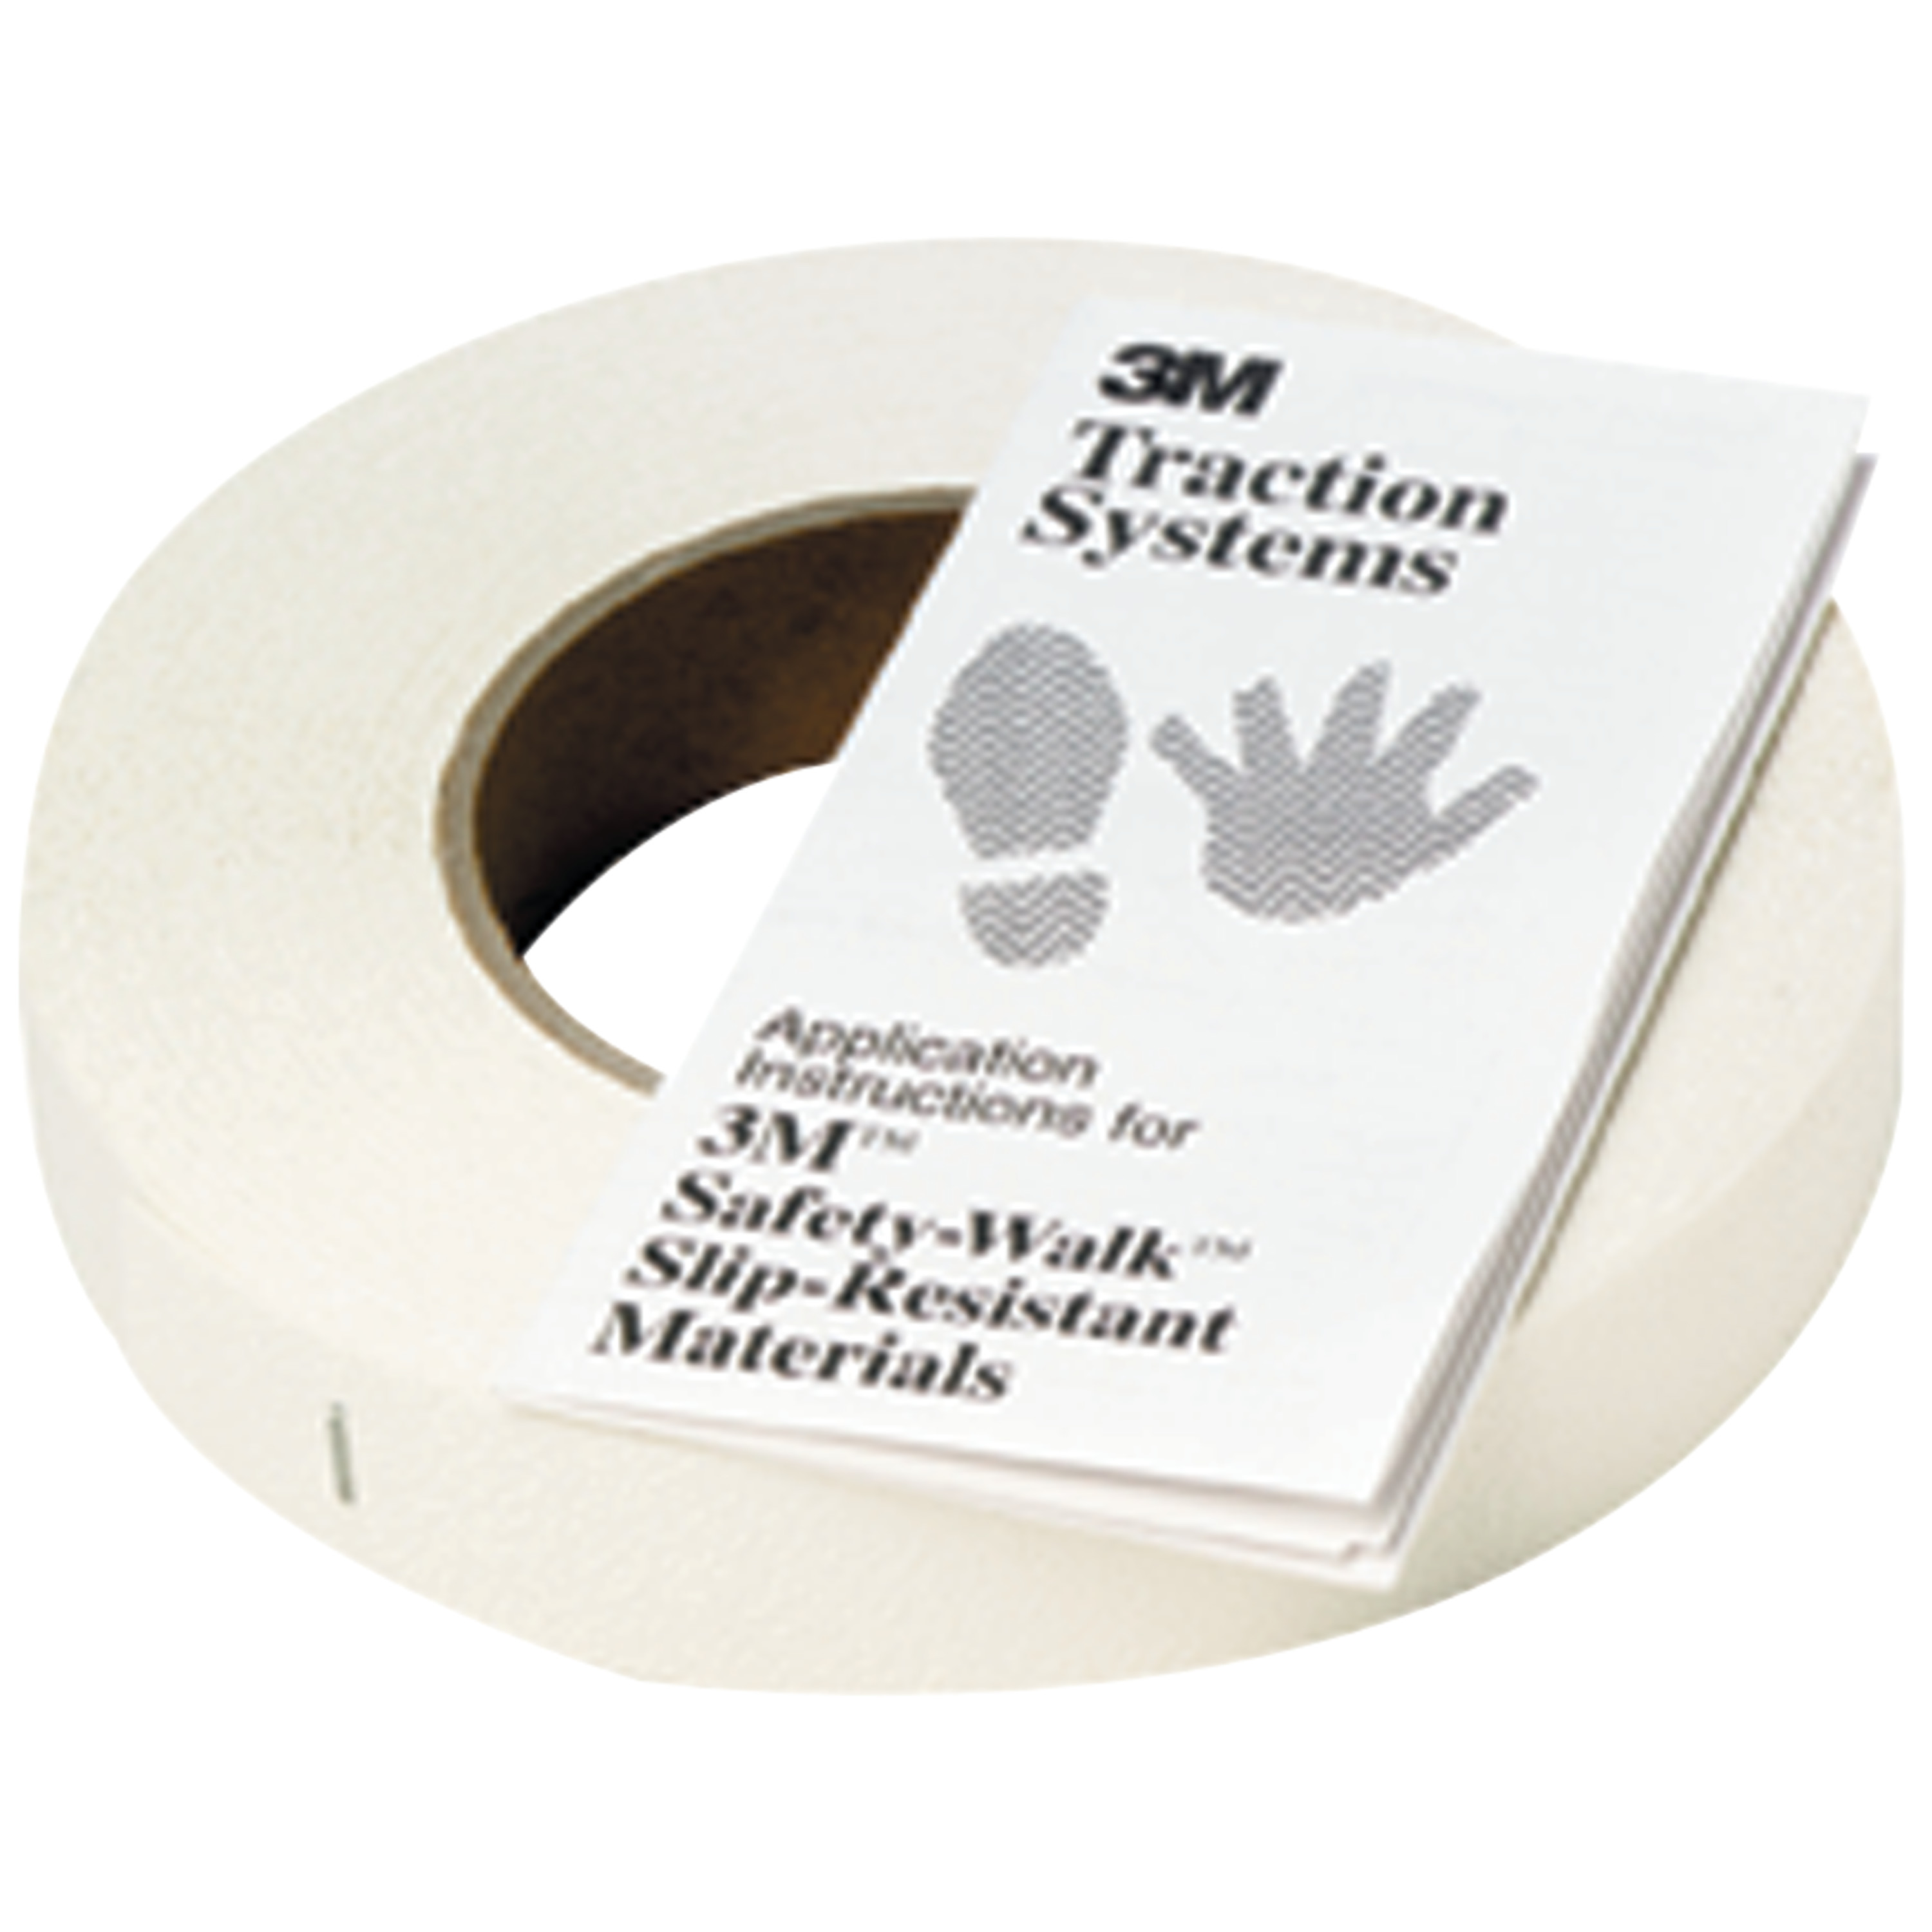 3M™ Safety-Walk™ Slip-Resistant Fine Resilient Tapes & Treads 280,
White, 1 in x 60 ft, 4 Rolls/Case